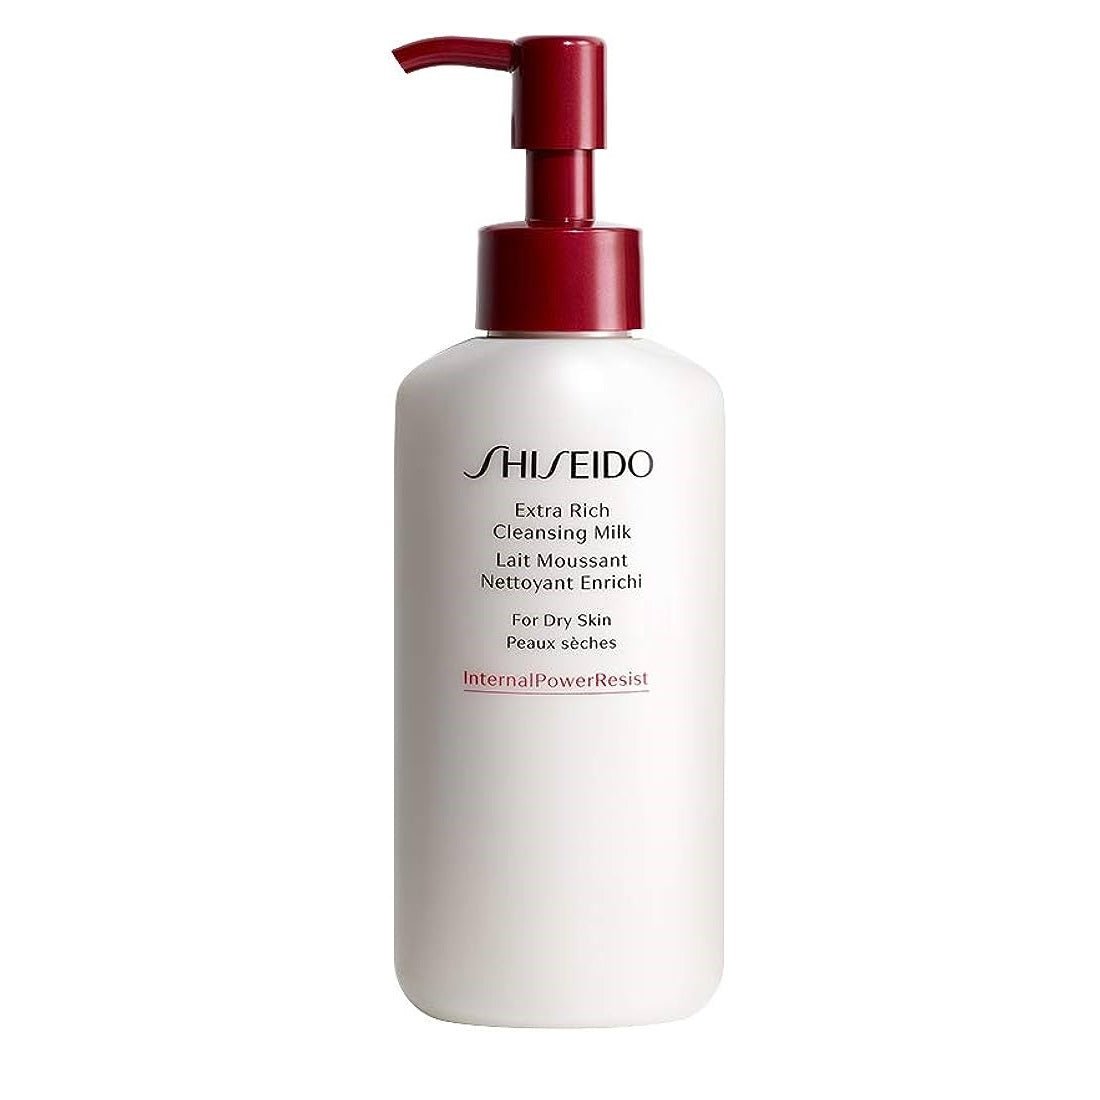 Shiseido Extra Rich Cleansing Milk For Dry Skin 125ml - LookincredibleShiseido729238145306